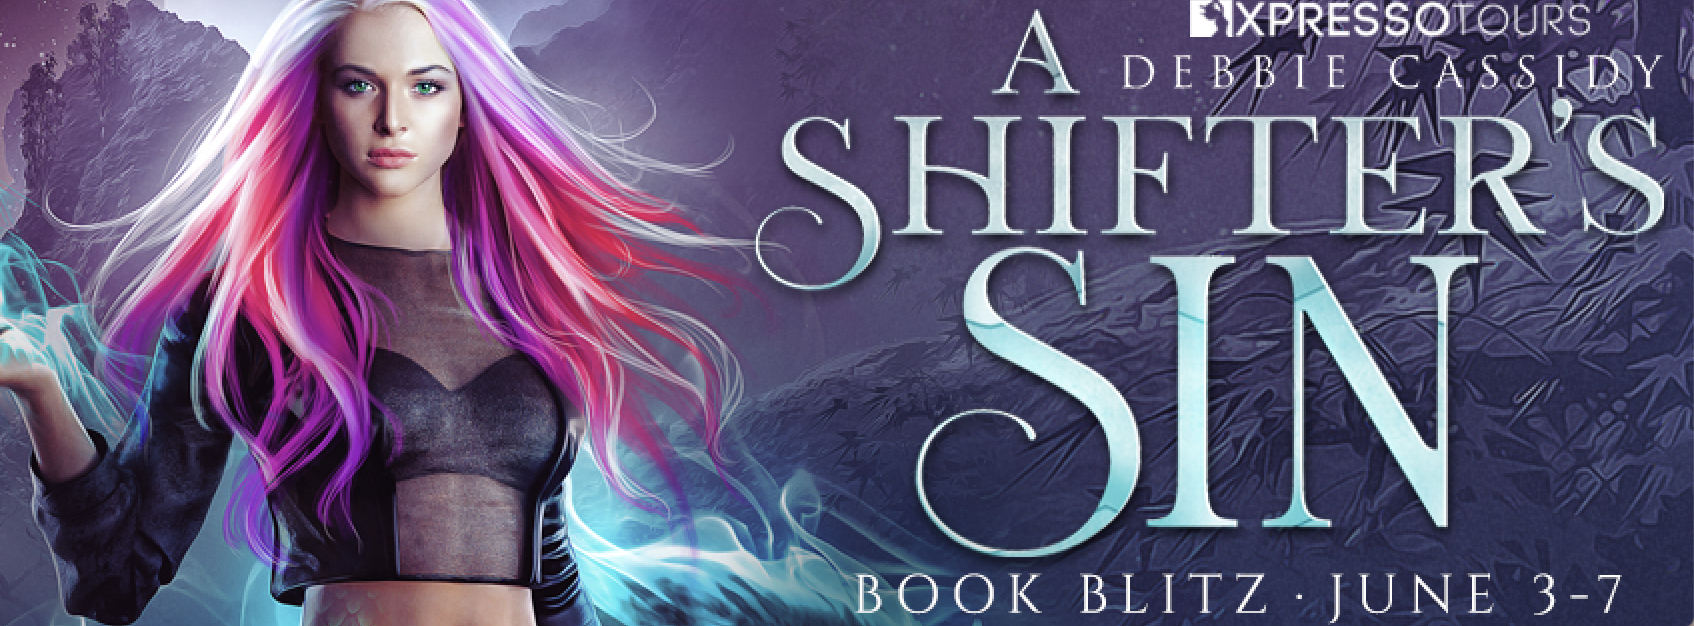 Book Blitz: A Shifter’s Sin by Debbie Cassidy + Giveaway (INT)